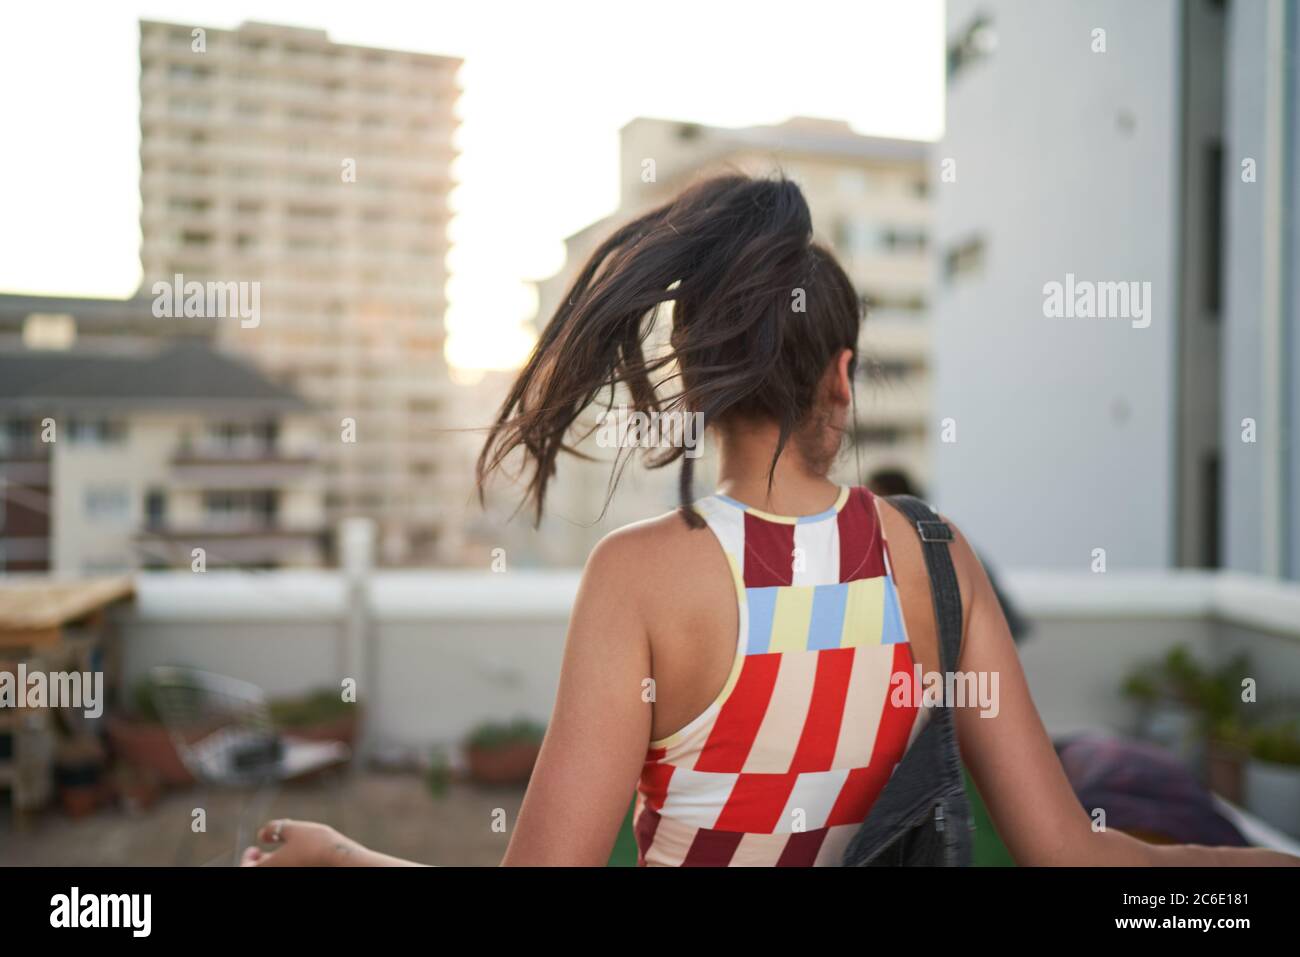 Carefree young woman dancing on urban rooftop Stock Photo